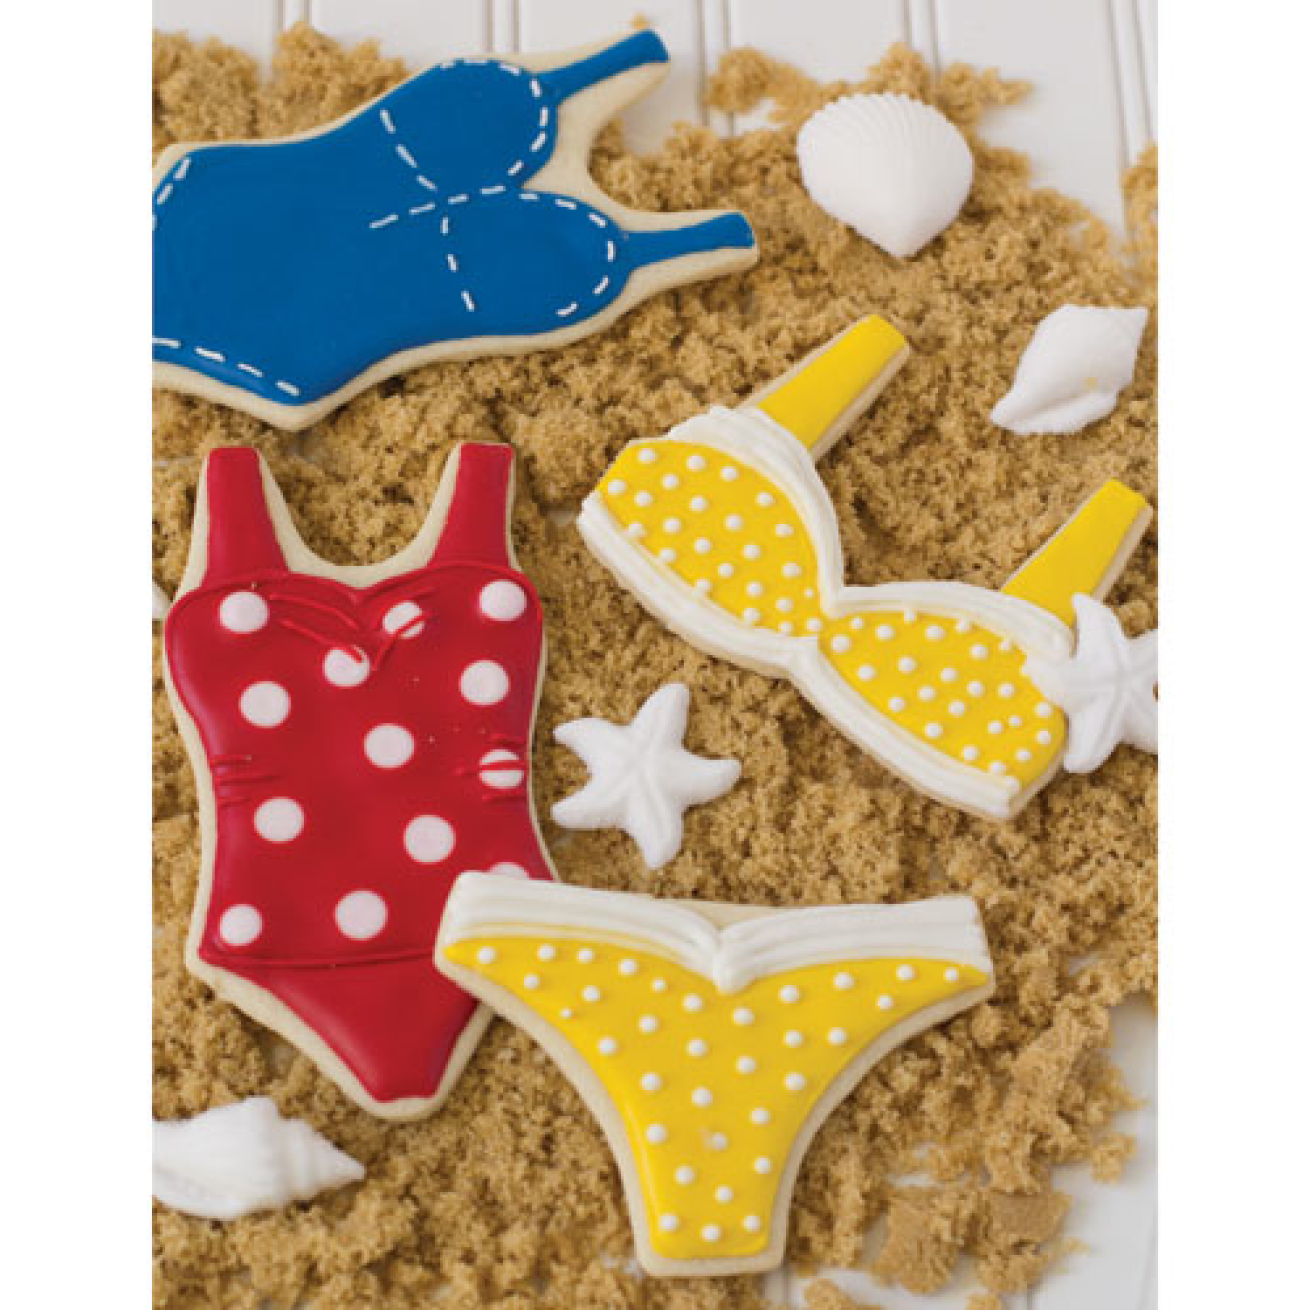 bathing suit shaped cookie cutters 